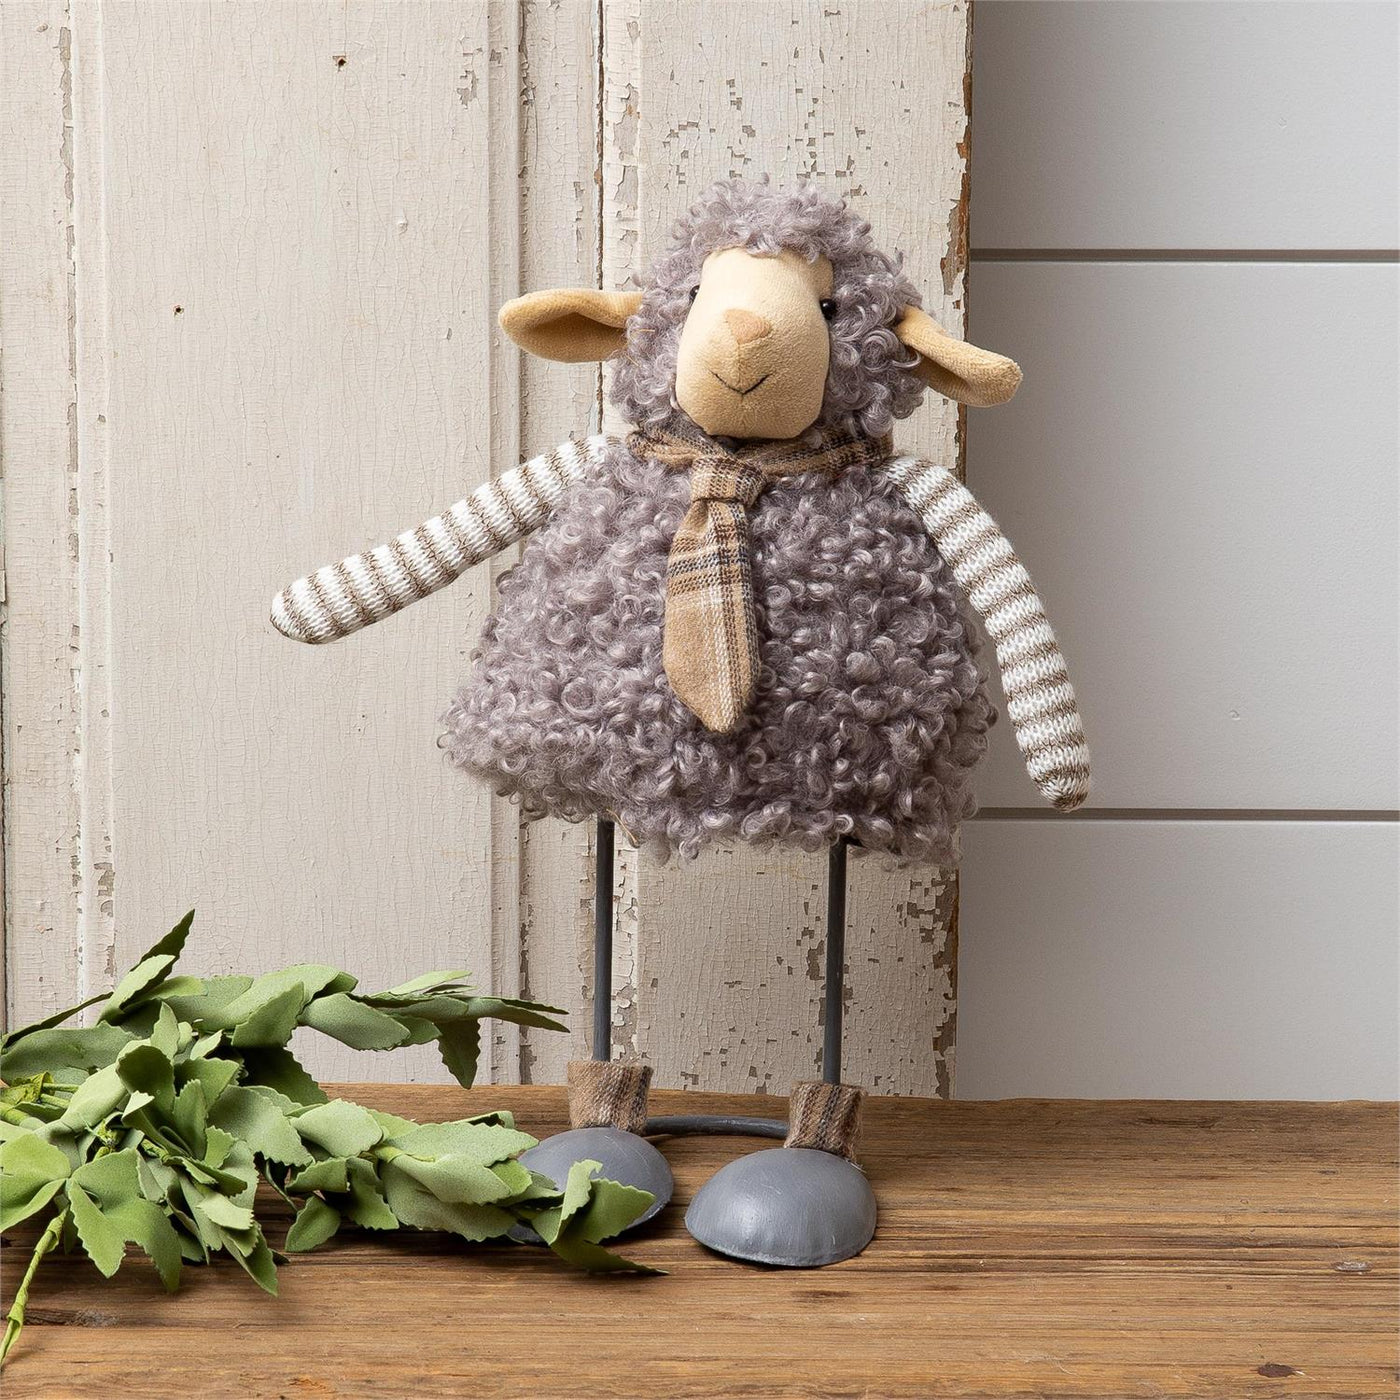 Norman the Sheep with Flannel Tie Figure